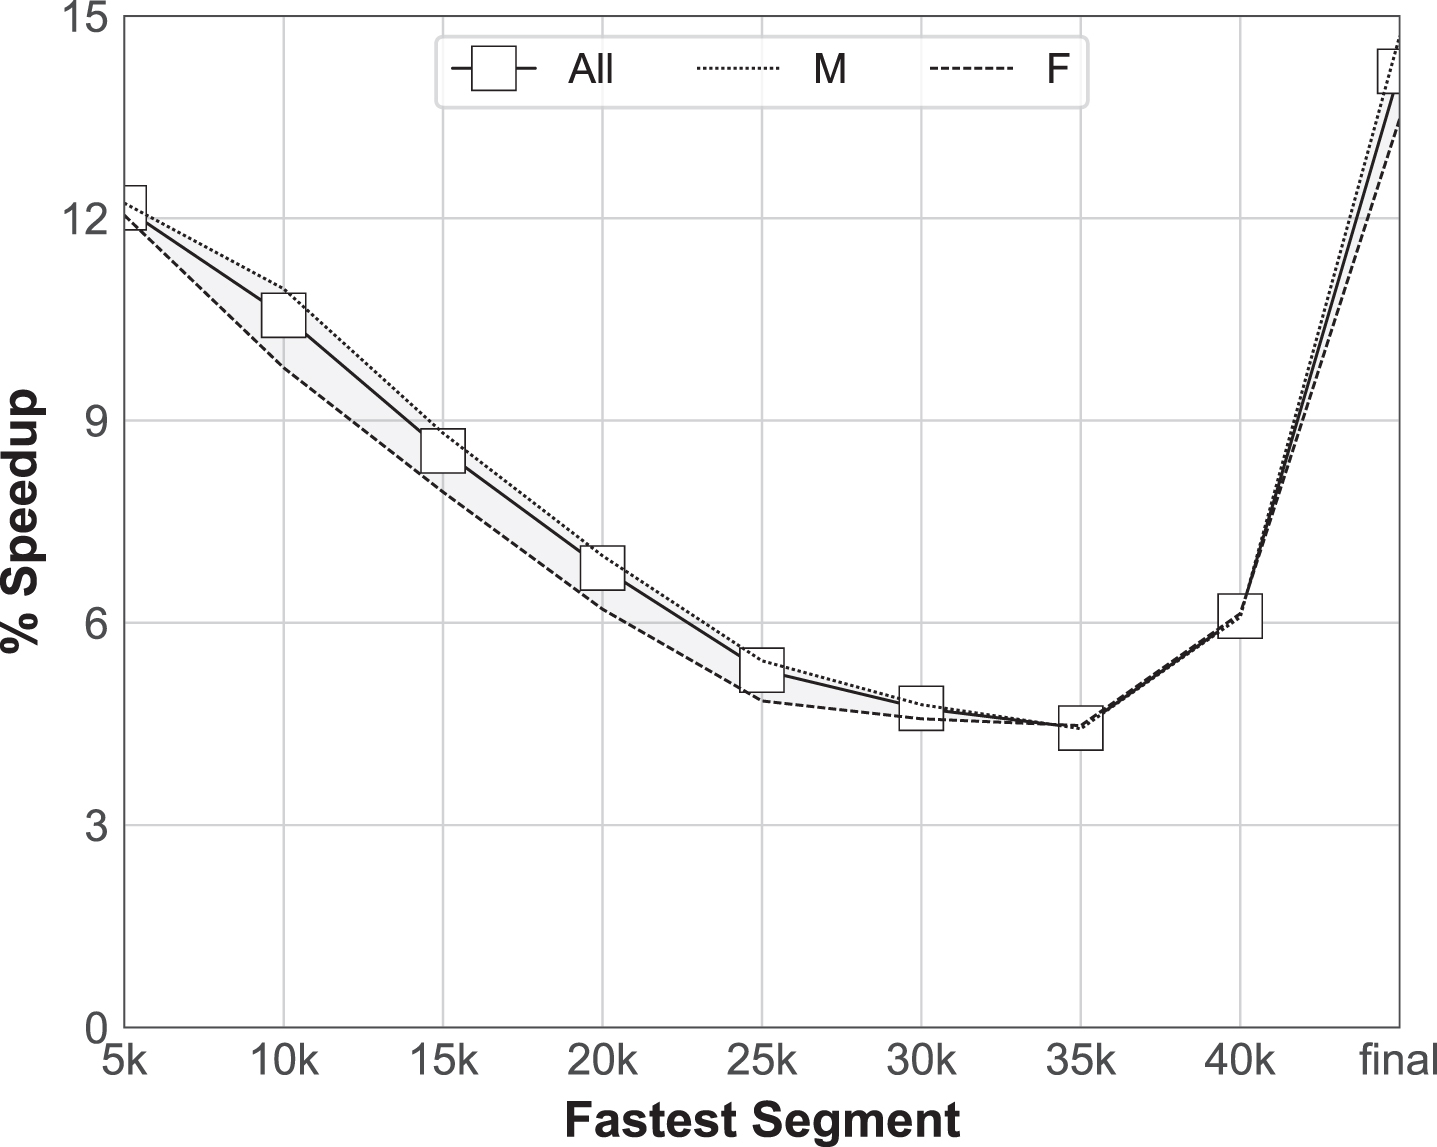 The relative speed-up of runners (all, male, female), who run a given race segment as their fastest. When run as the fastest segment, the early segments (5km, 10km, 15km) tend to be signifiantly faster than when any other segment is fastest, with the exception of the short (2.195km) final segment